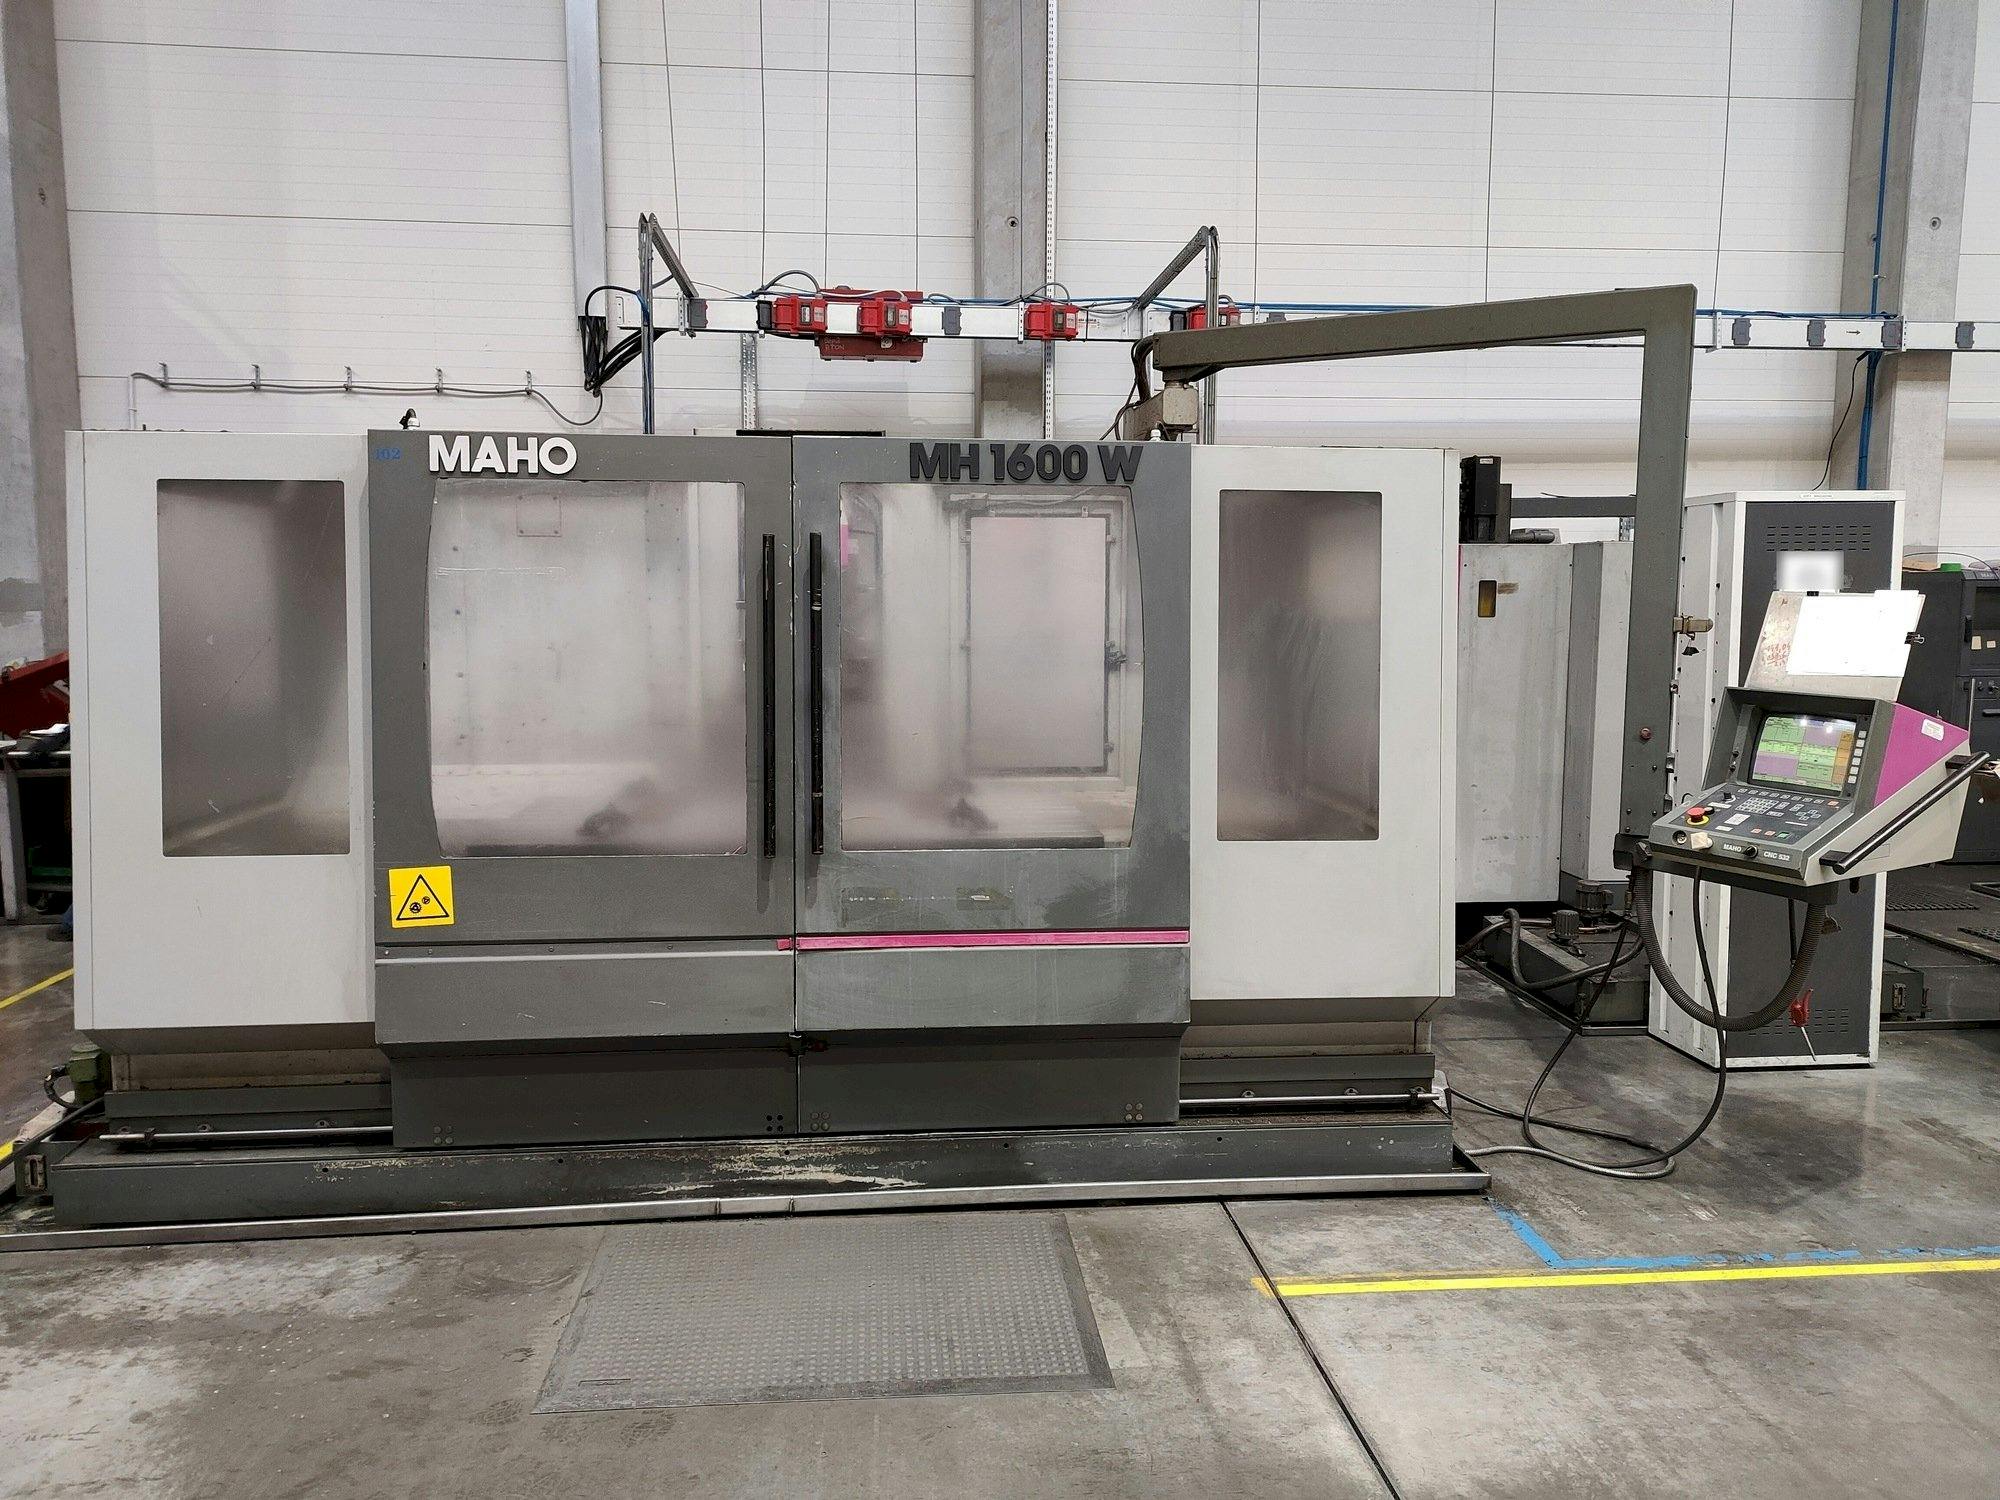 Front view of Maho MH 1600 W  machine